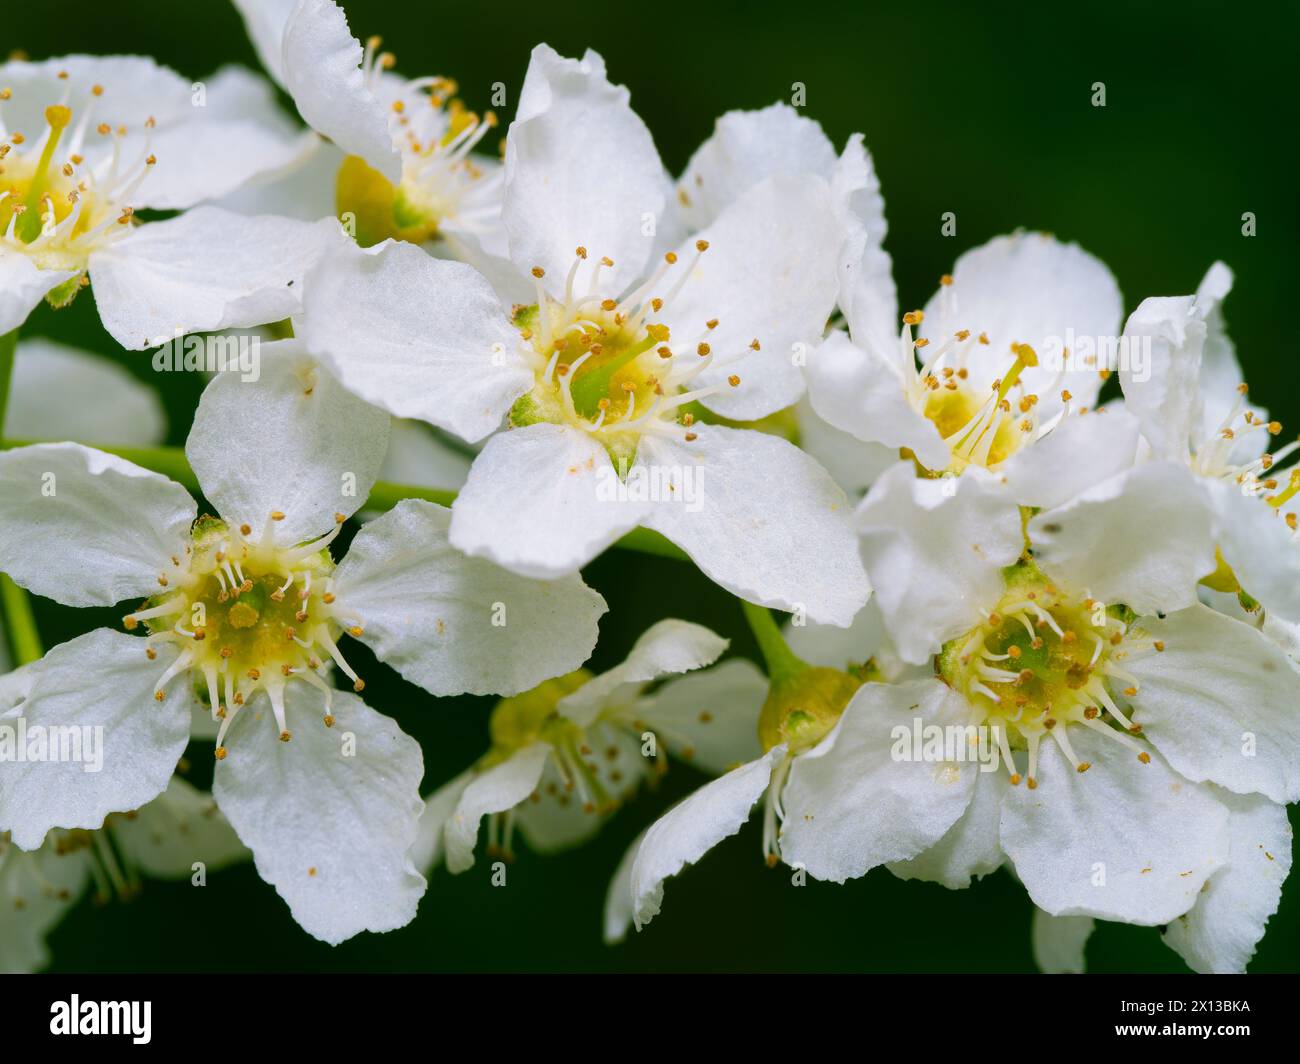 Black Dogwood, Hagberry or Bird Cherry, also known as the Mayday Tree. White bunches of attractive flowers. Stock Photo